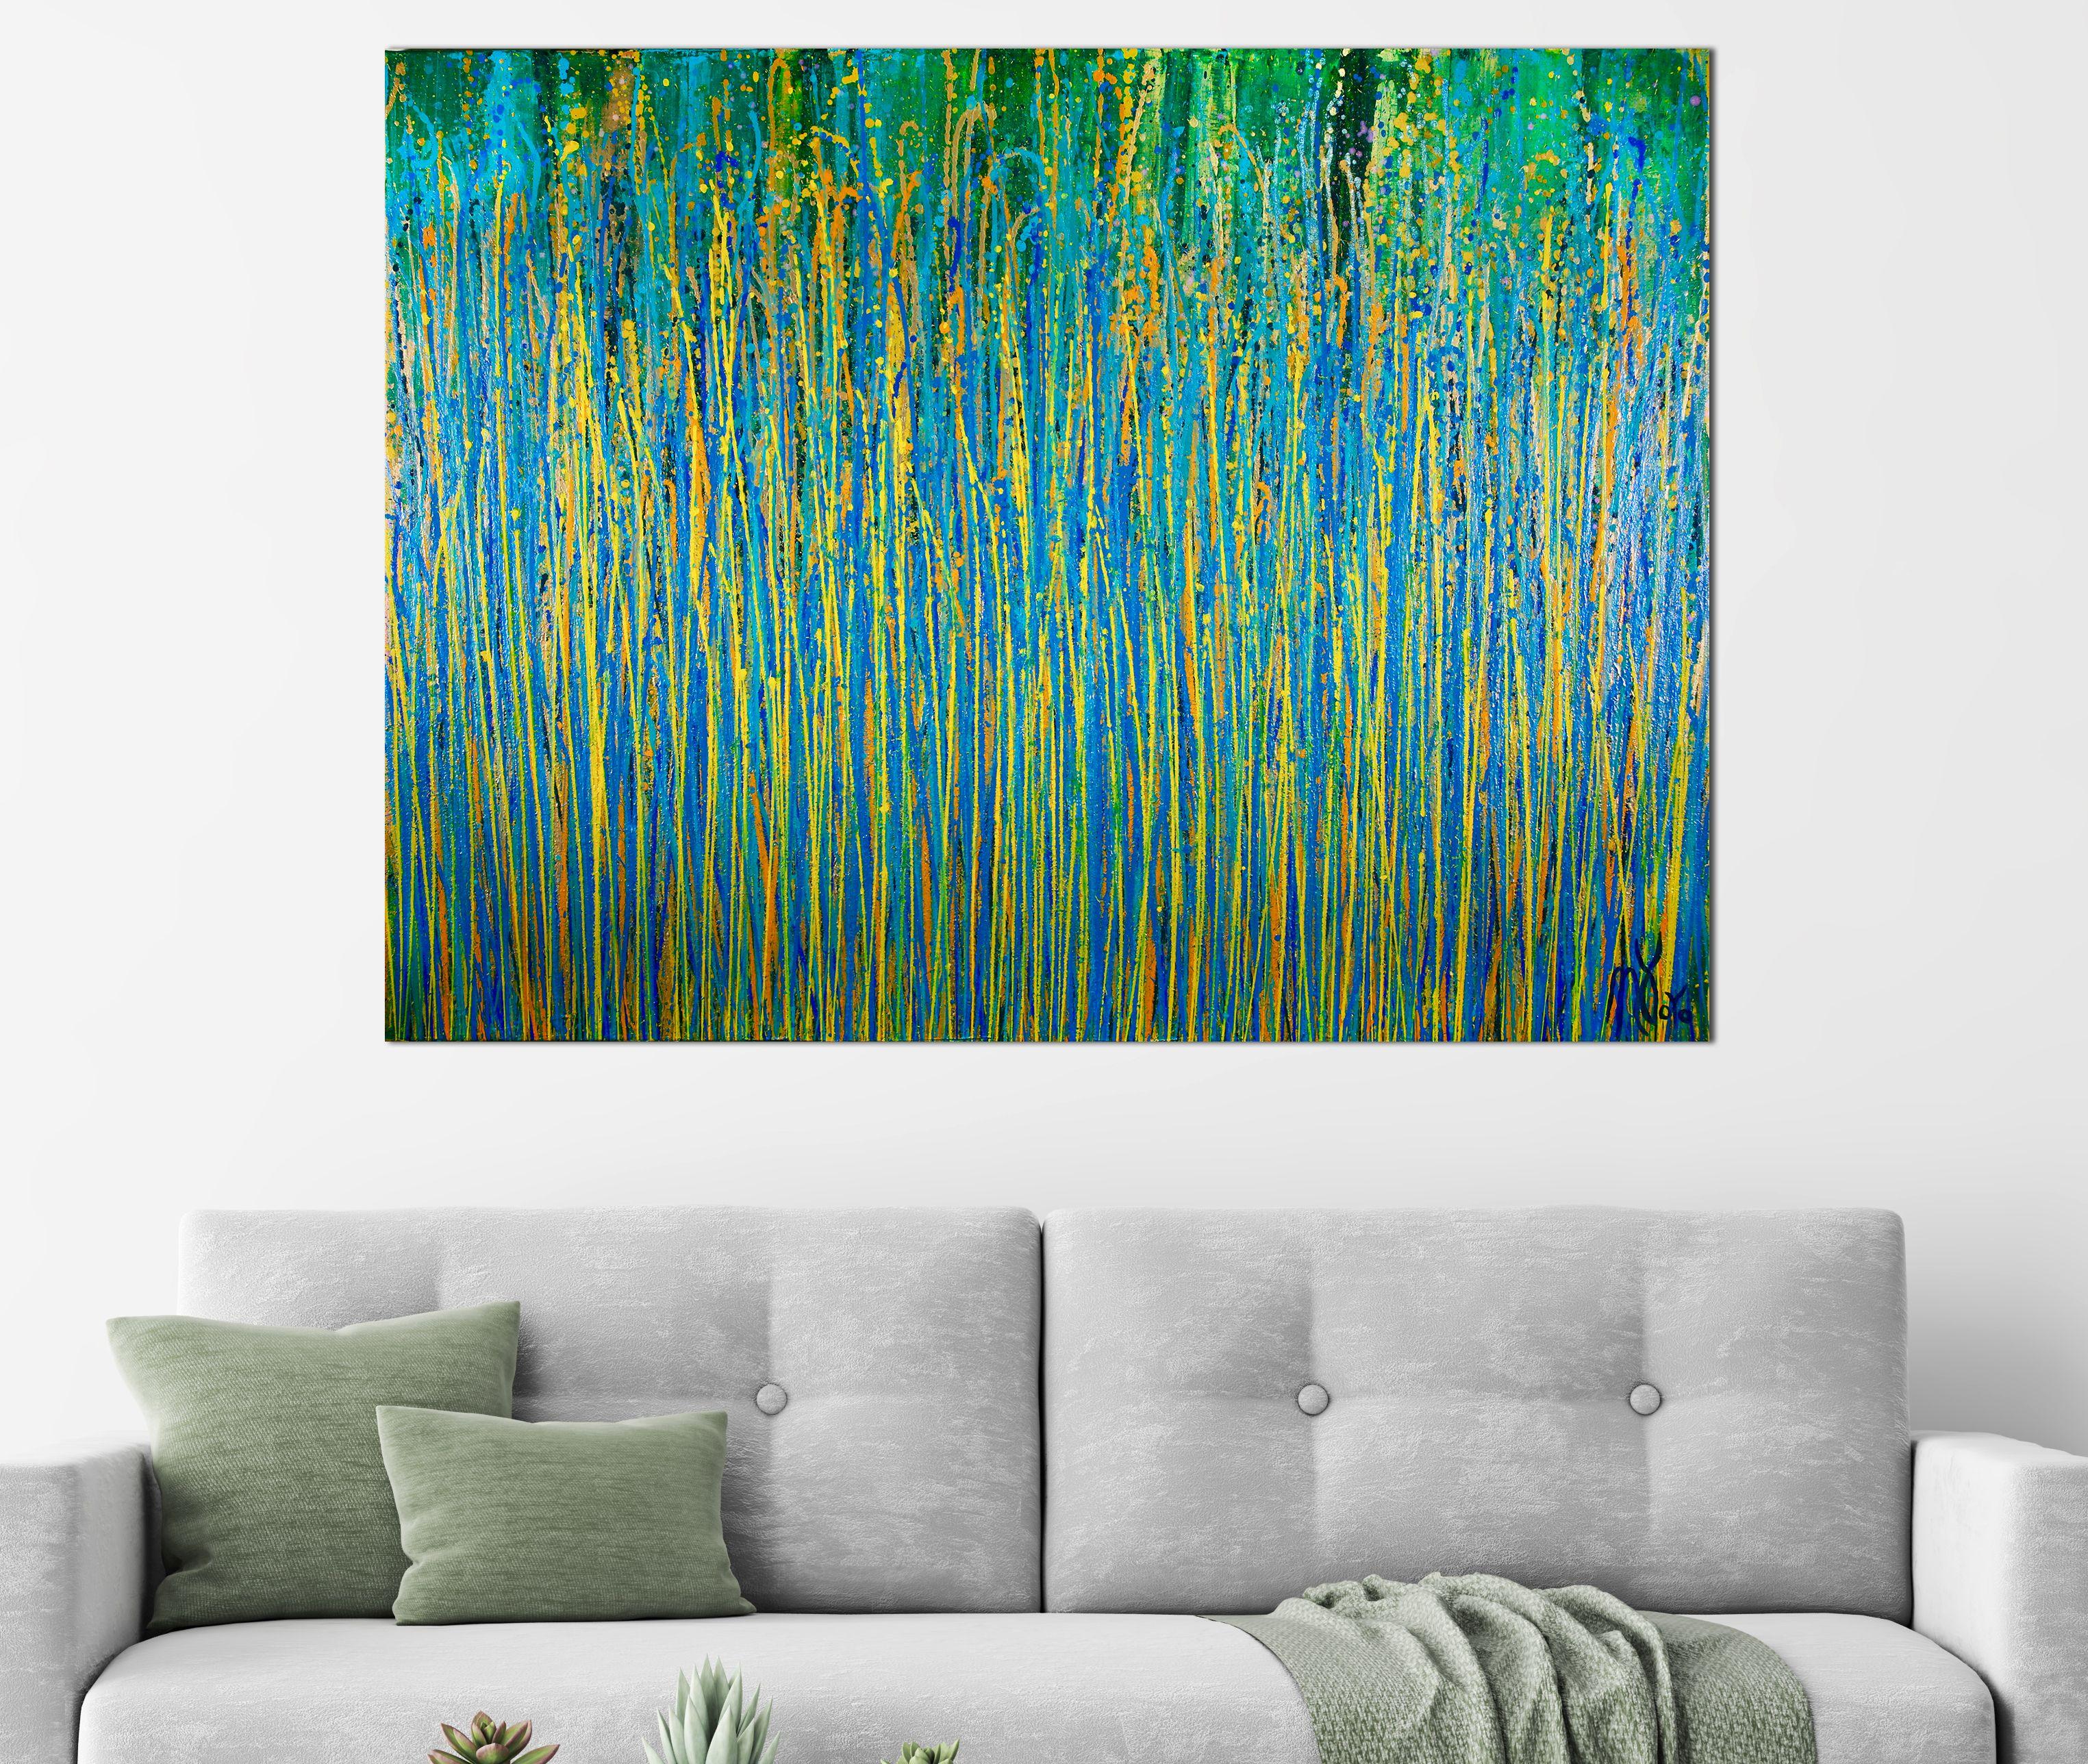 IMPACTFUL EMERALD GREEN COLORFIELD!     Contemplative, bold, NATURE inspired- Statement Artwork. Organic gestural color field painting with many shades of green, teal and subtle colorful details in the background. Signed ready to hang.     I only